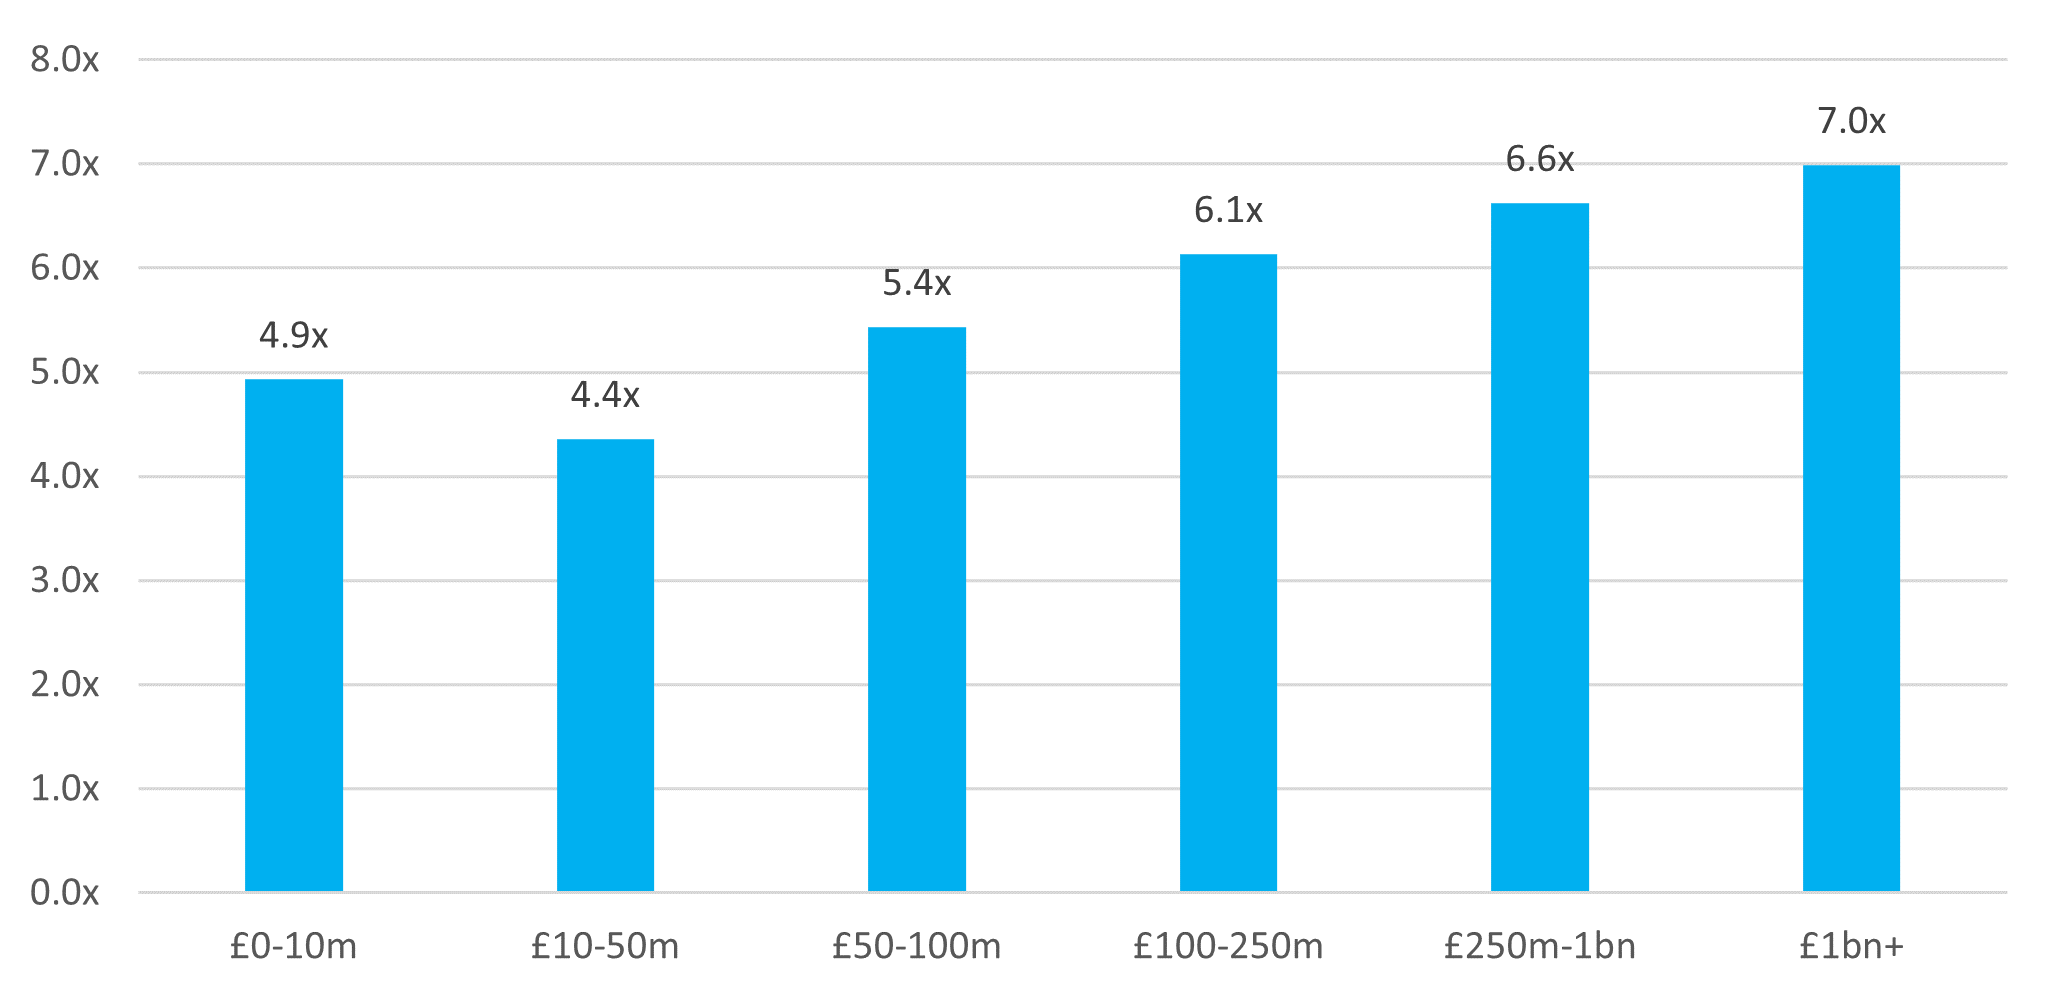 A Bar chart showing the Revenue Multiples by size band. The lowest multiple was the size band between £10-50m and the highest size band was 1bn.